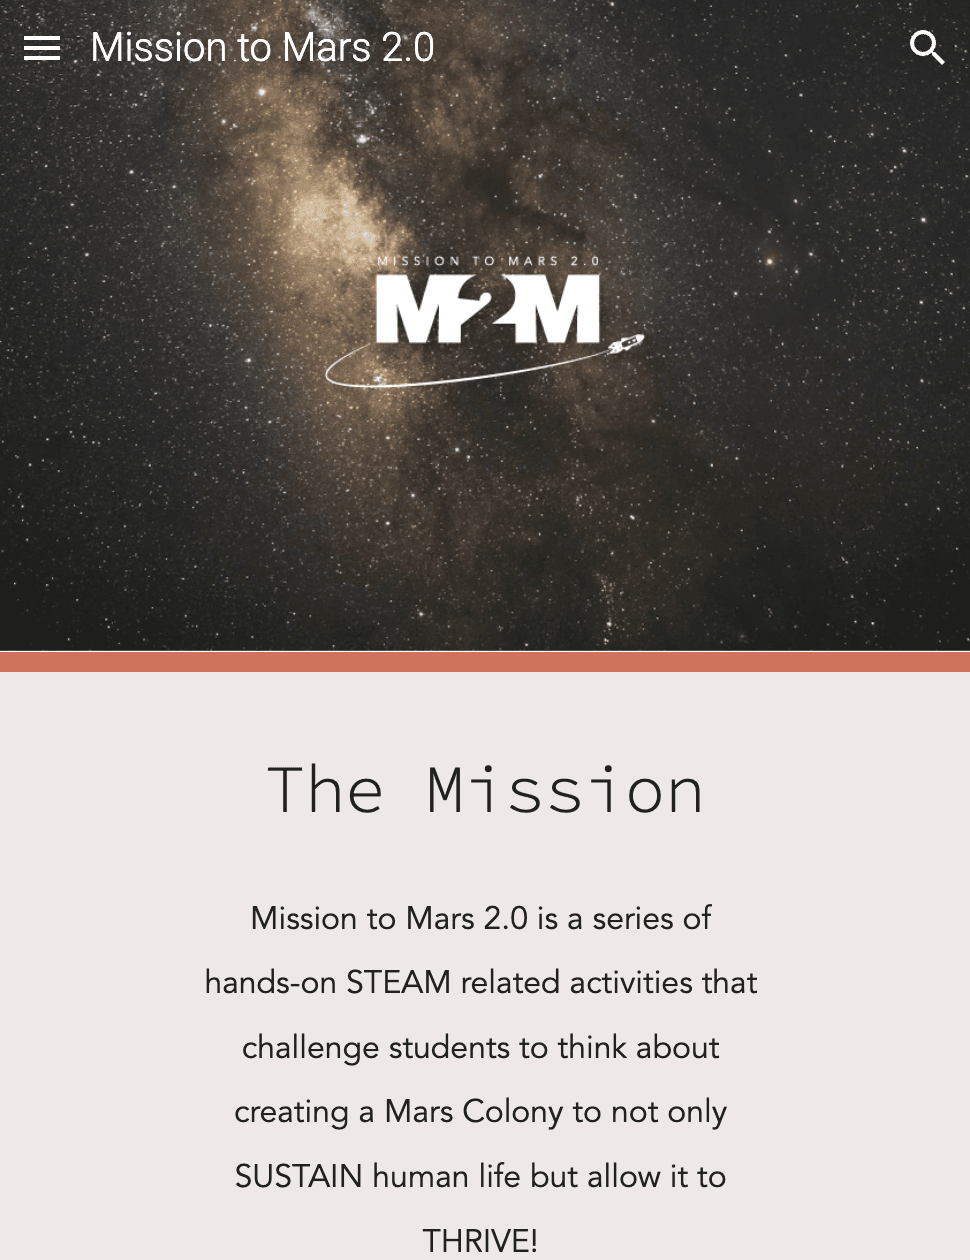 Check out the Mission2Mars Curriculum